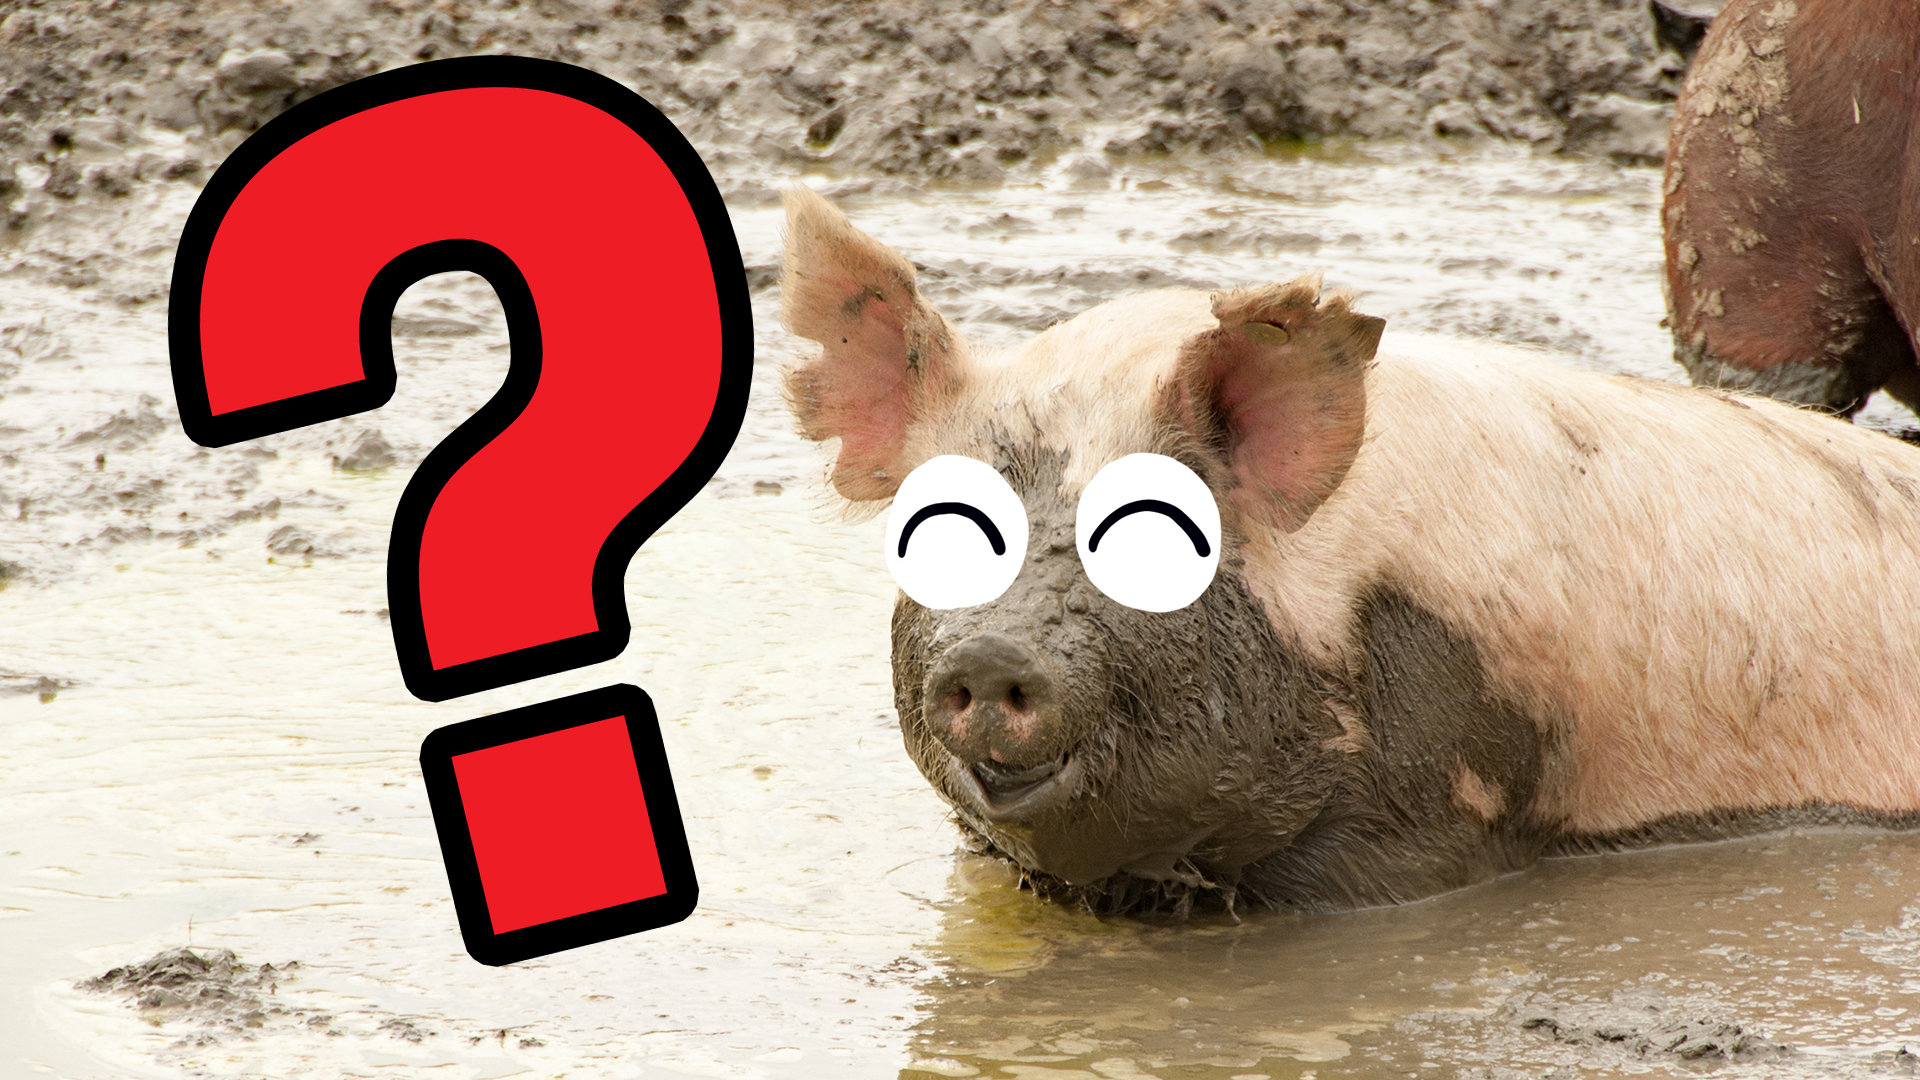 A pig sitting in a puddle of muddy water